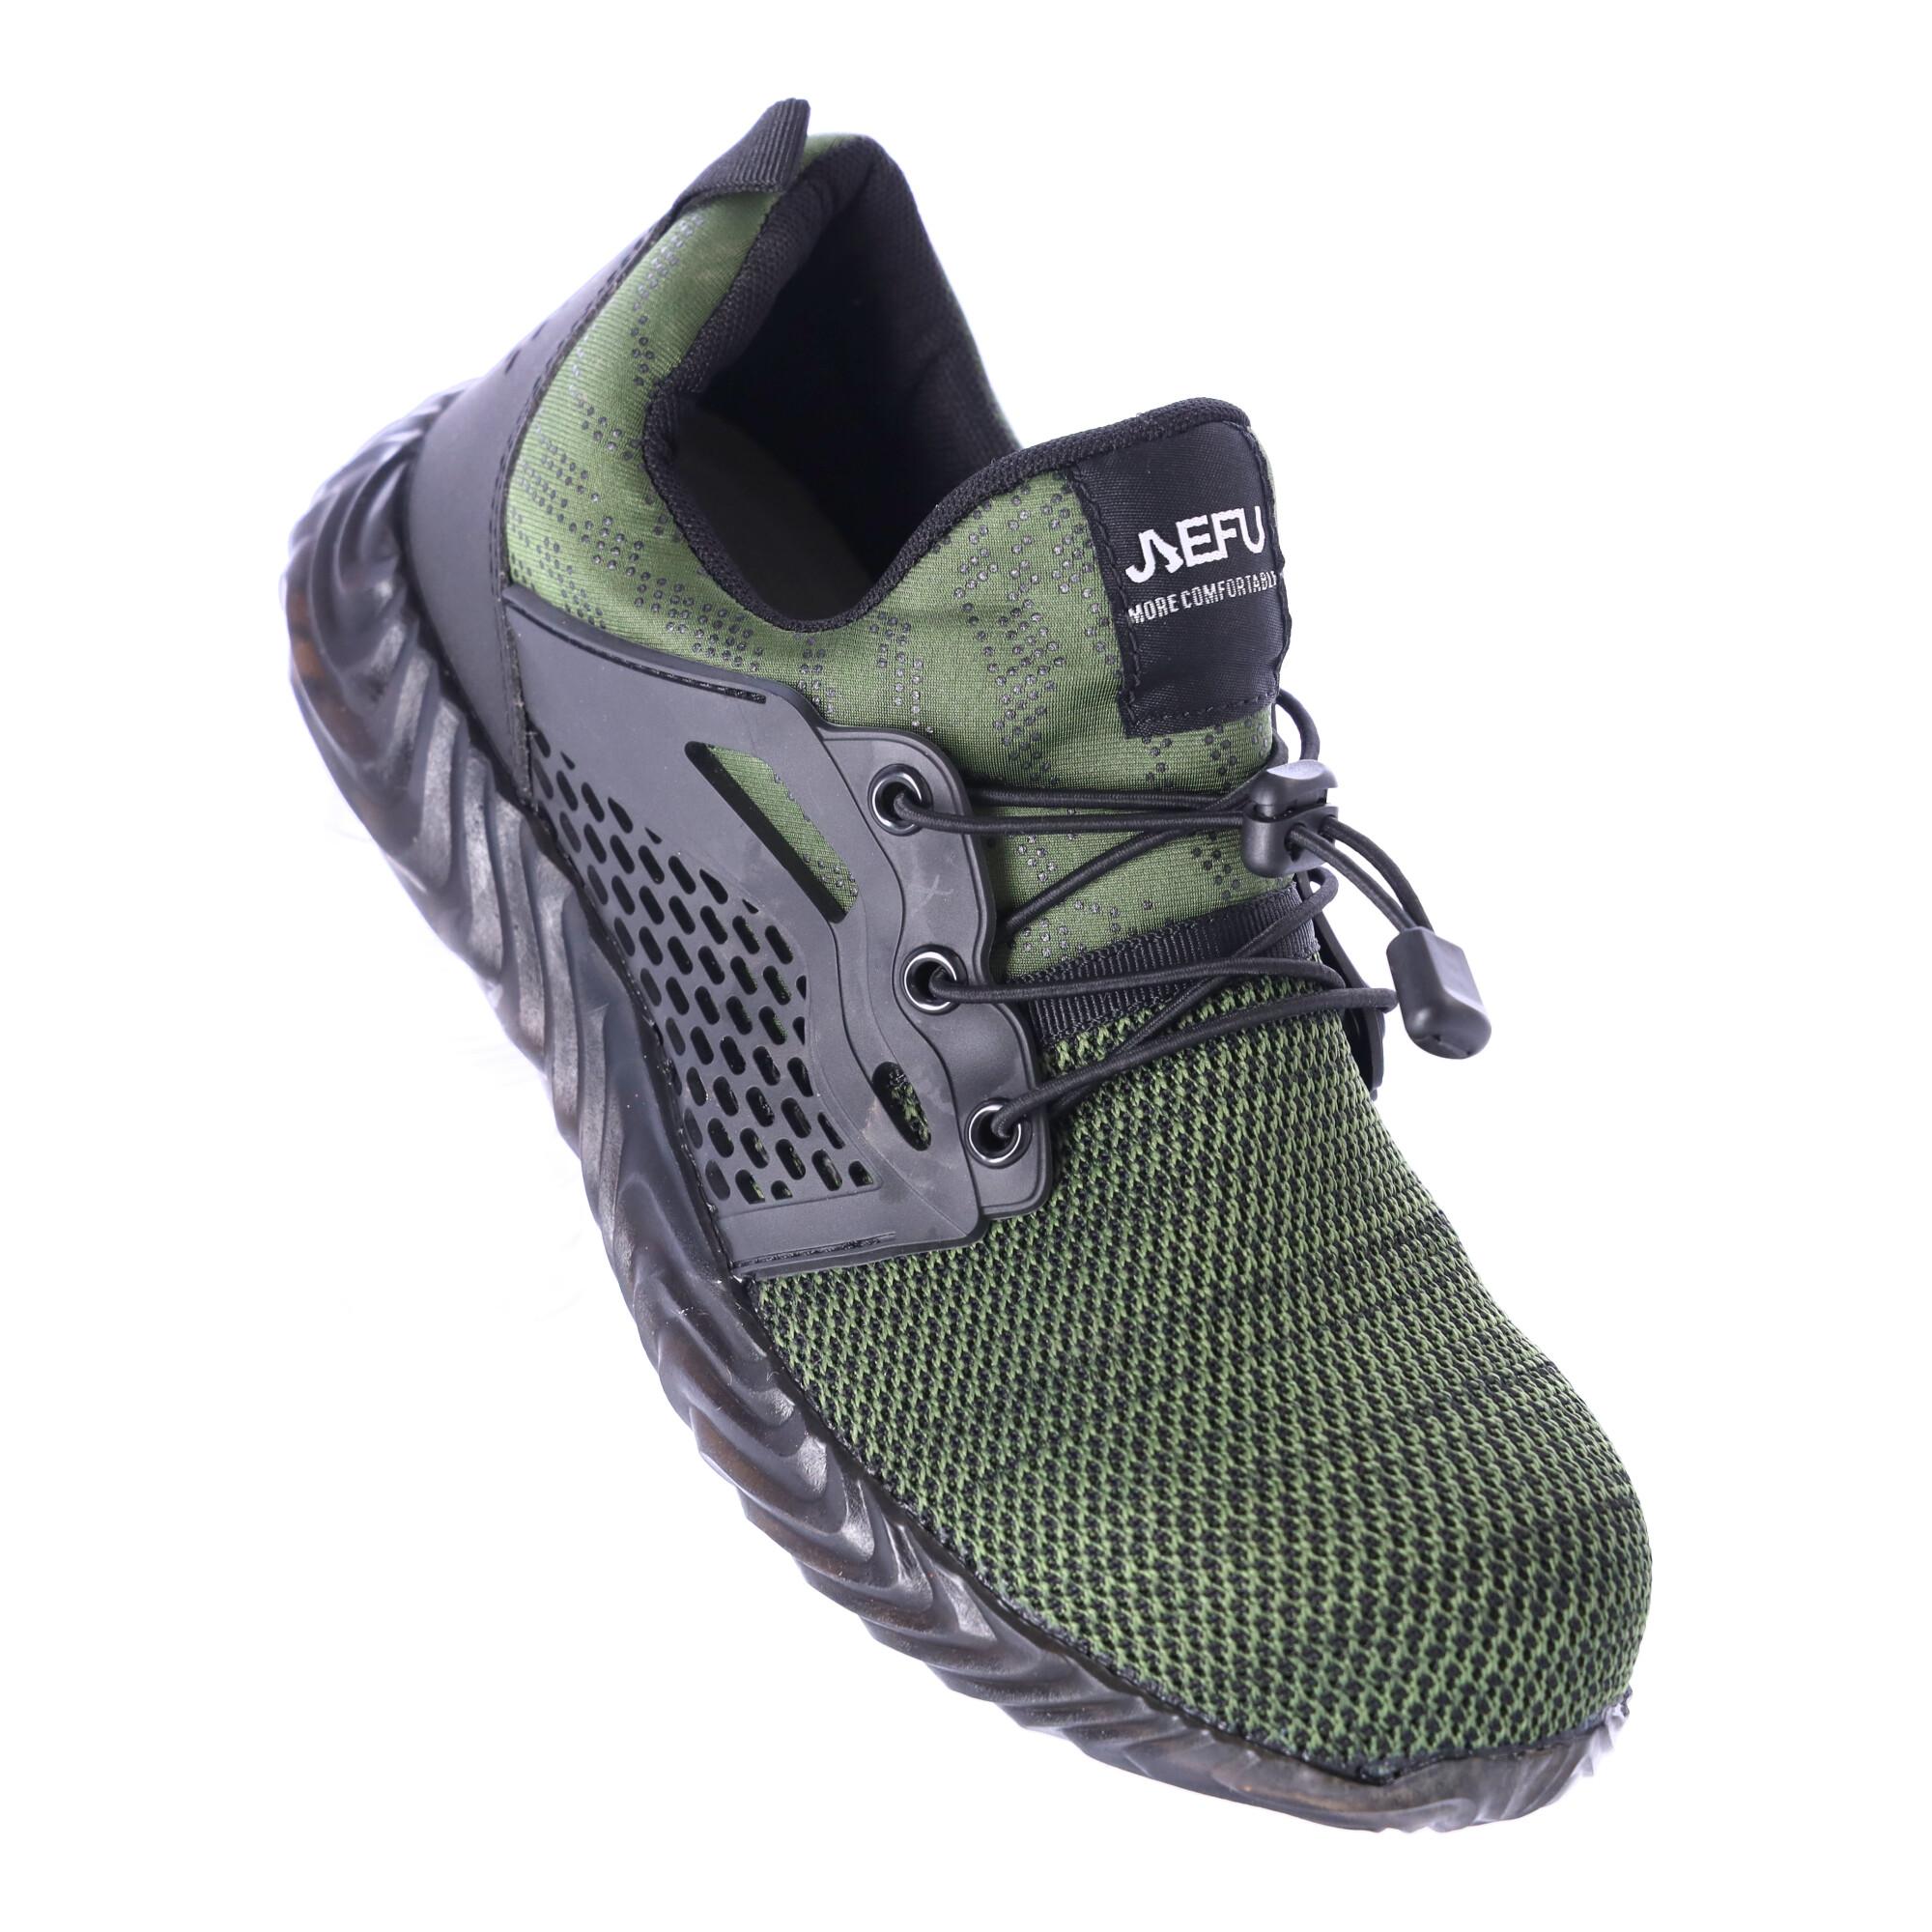 Work safety shoes "44" - green